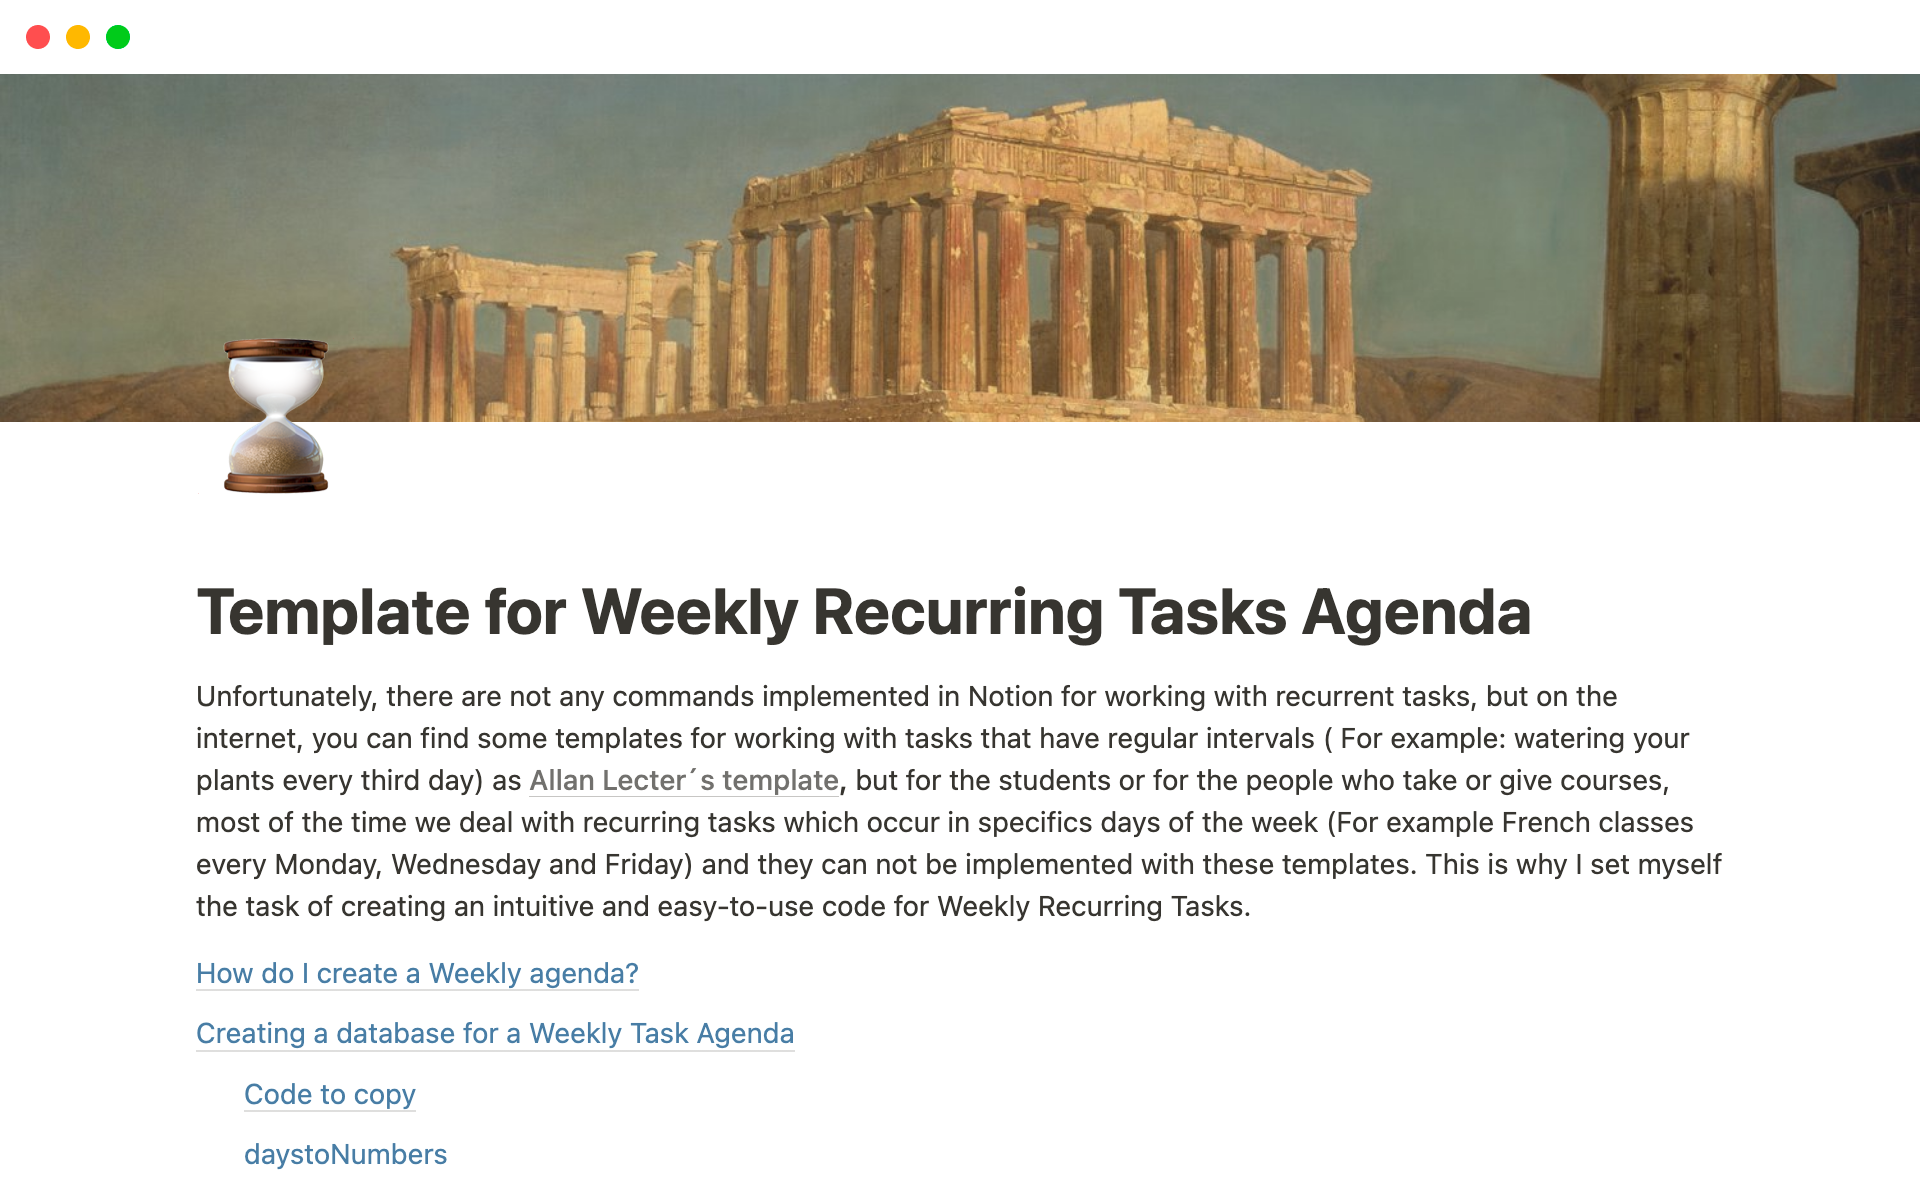 You can create an agenda for recurring tasks.